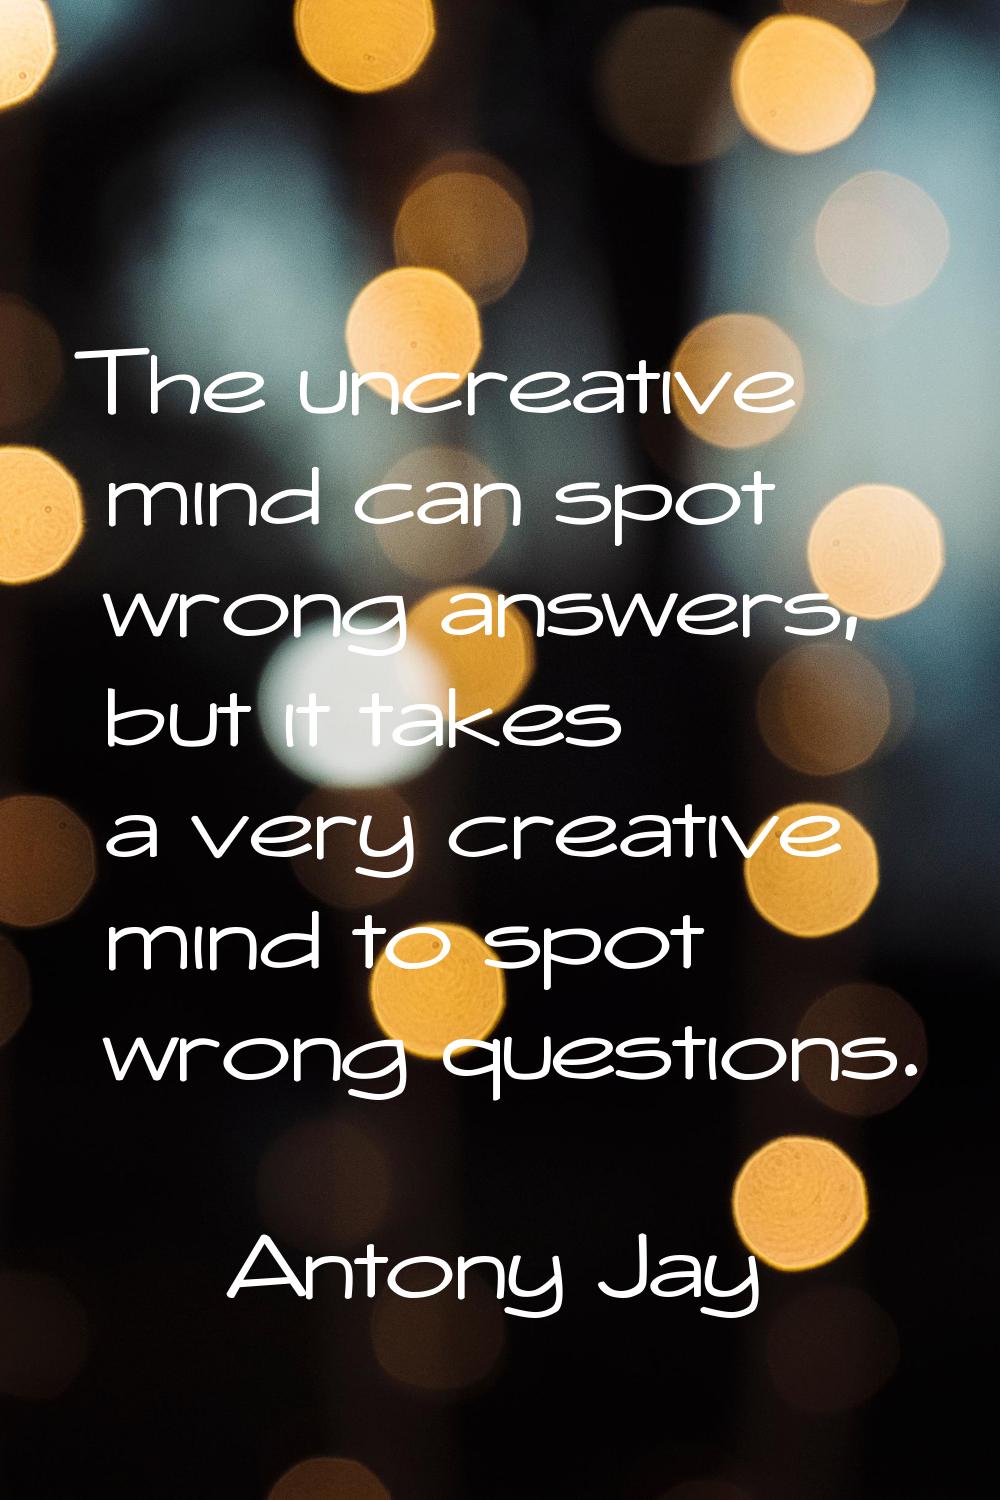 The uncreative mind can spot wrong answers, but it takes a very creative mind to spot wrong questio